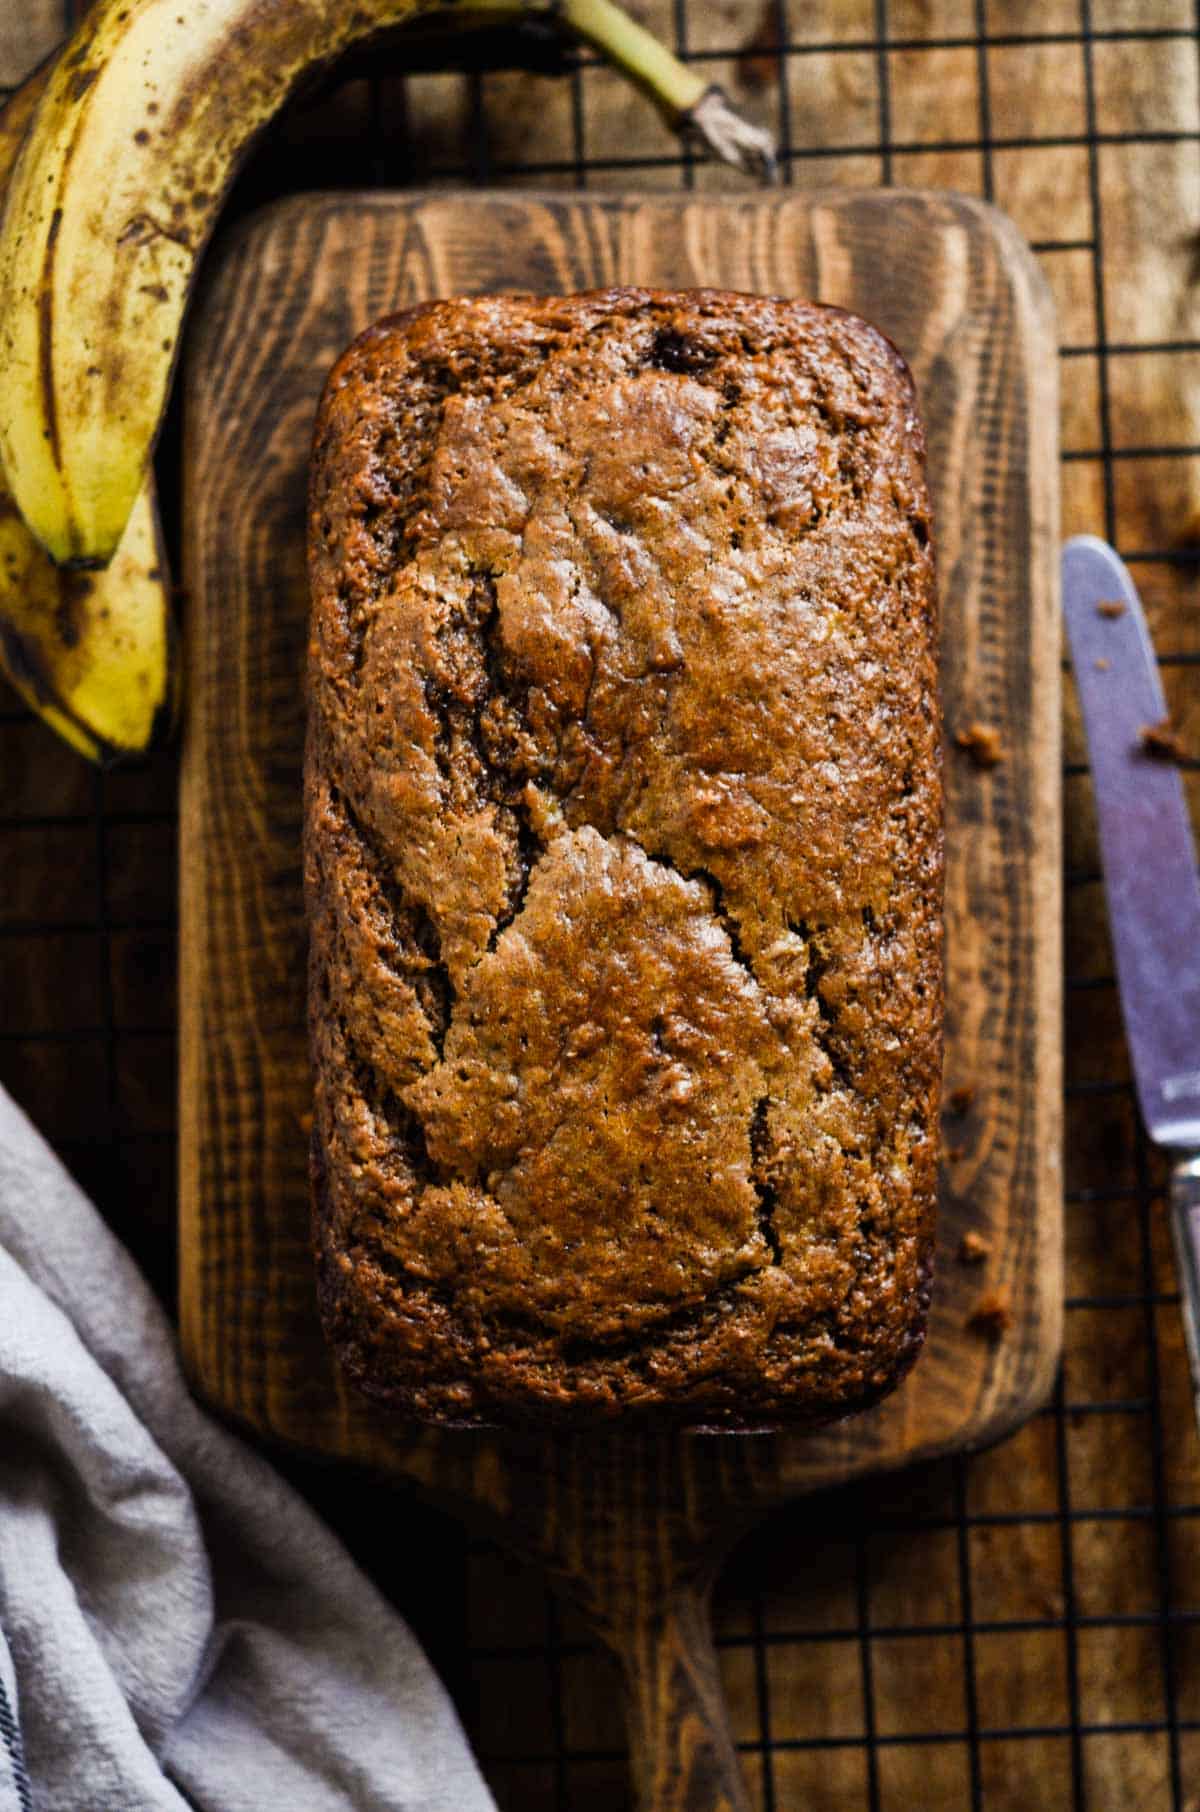 Fully baked moist golden brown banana bread with cracks on the top.